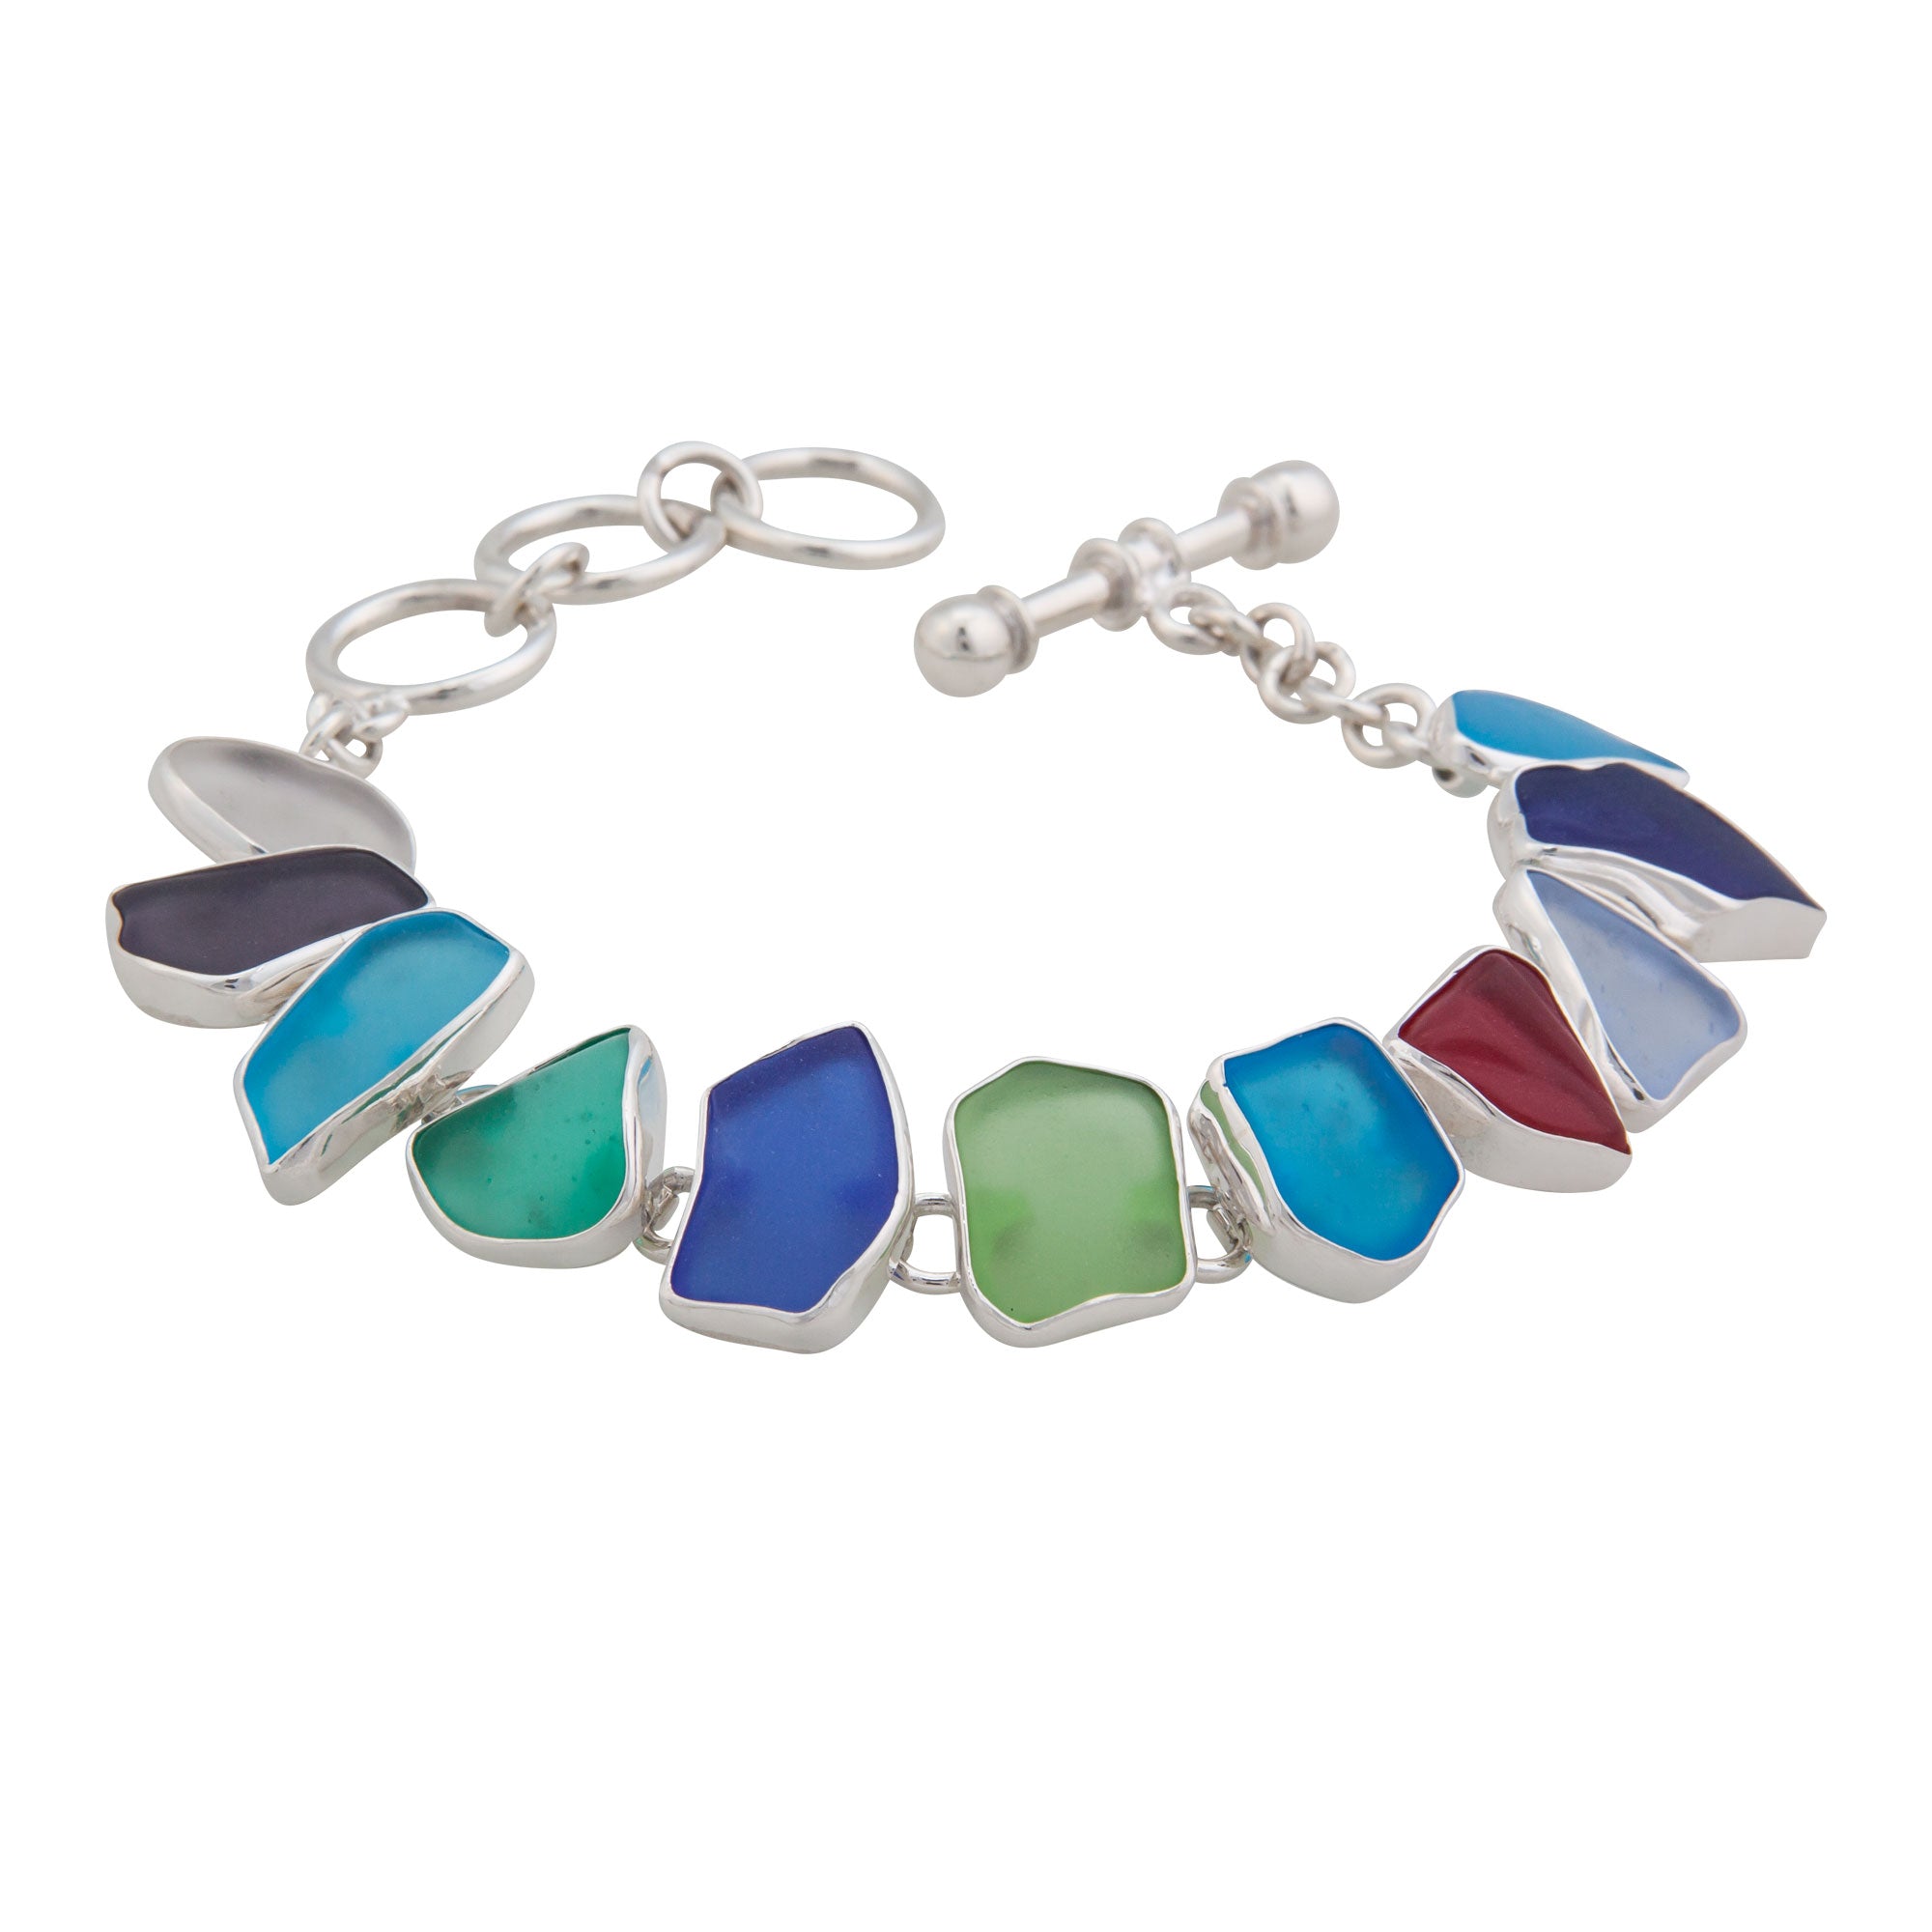 Multi-Color Small Recycled Glass Bracelet | Charles Albert Jewelry